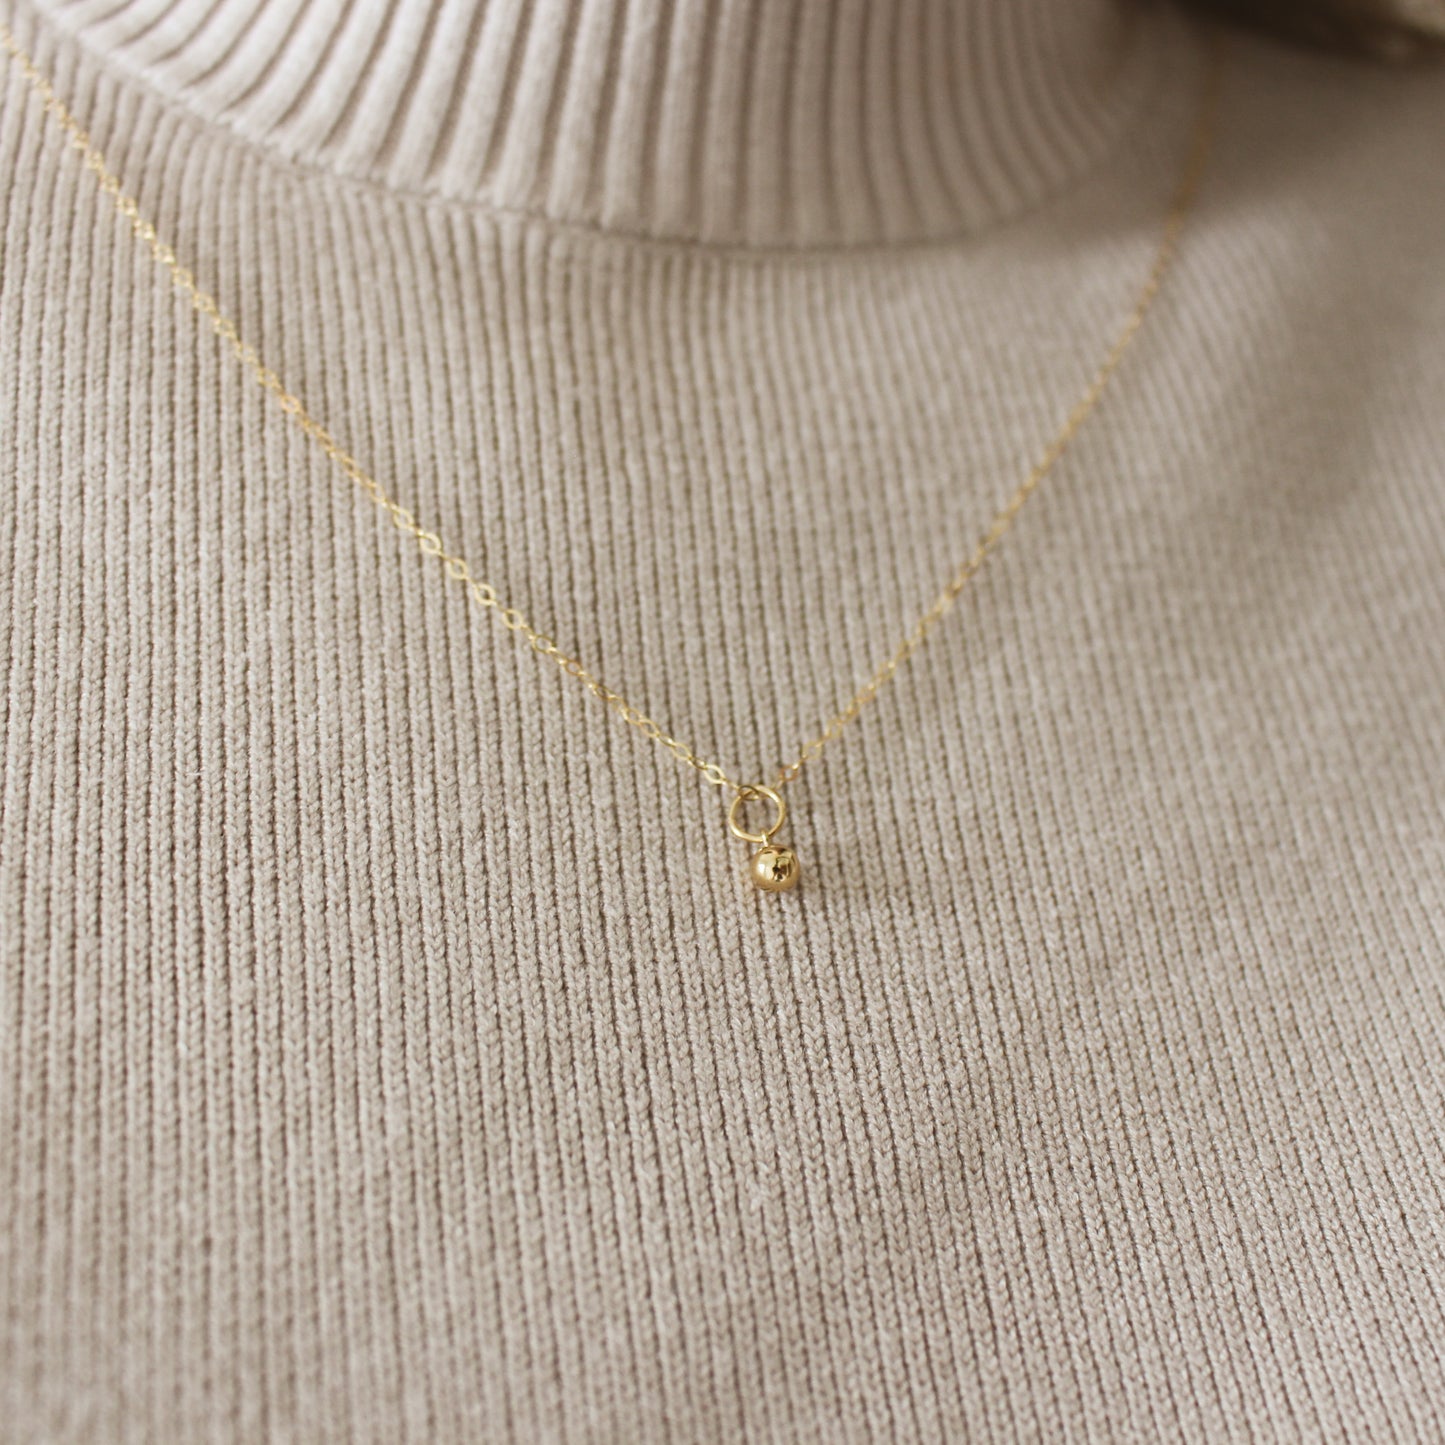 Aesthetic 14K Gold Filled Ball Necklace ∙ 4mm